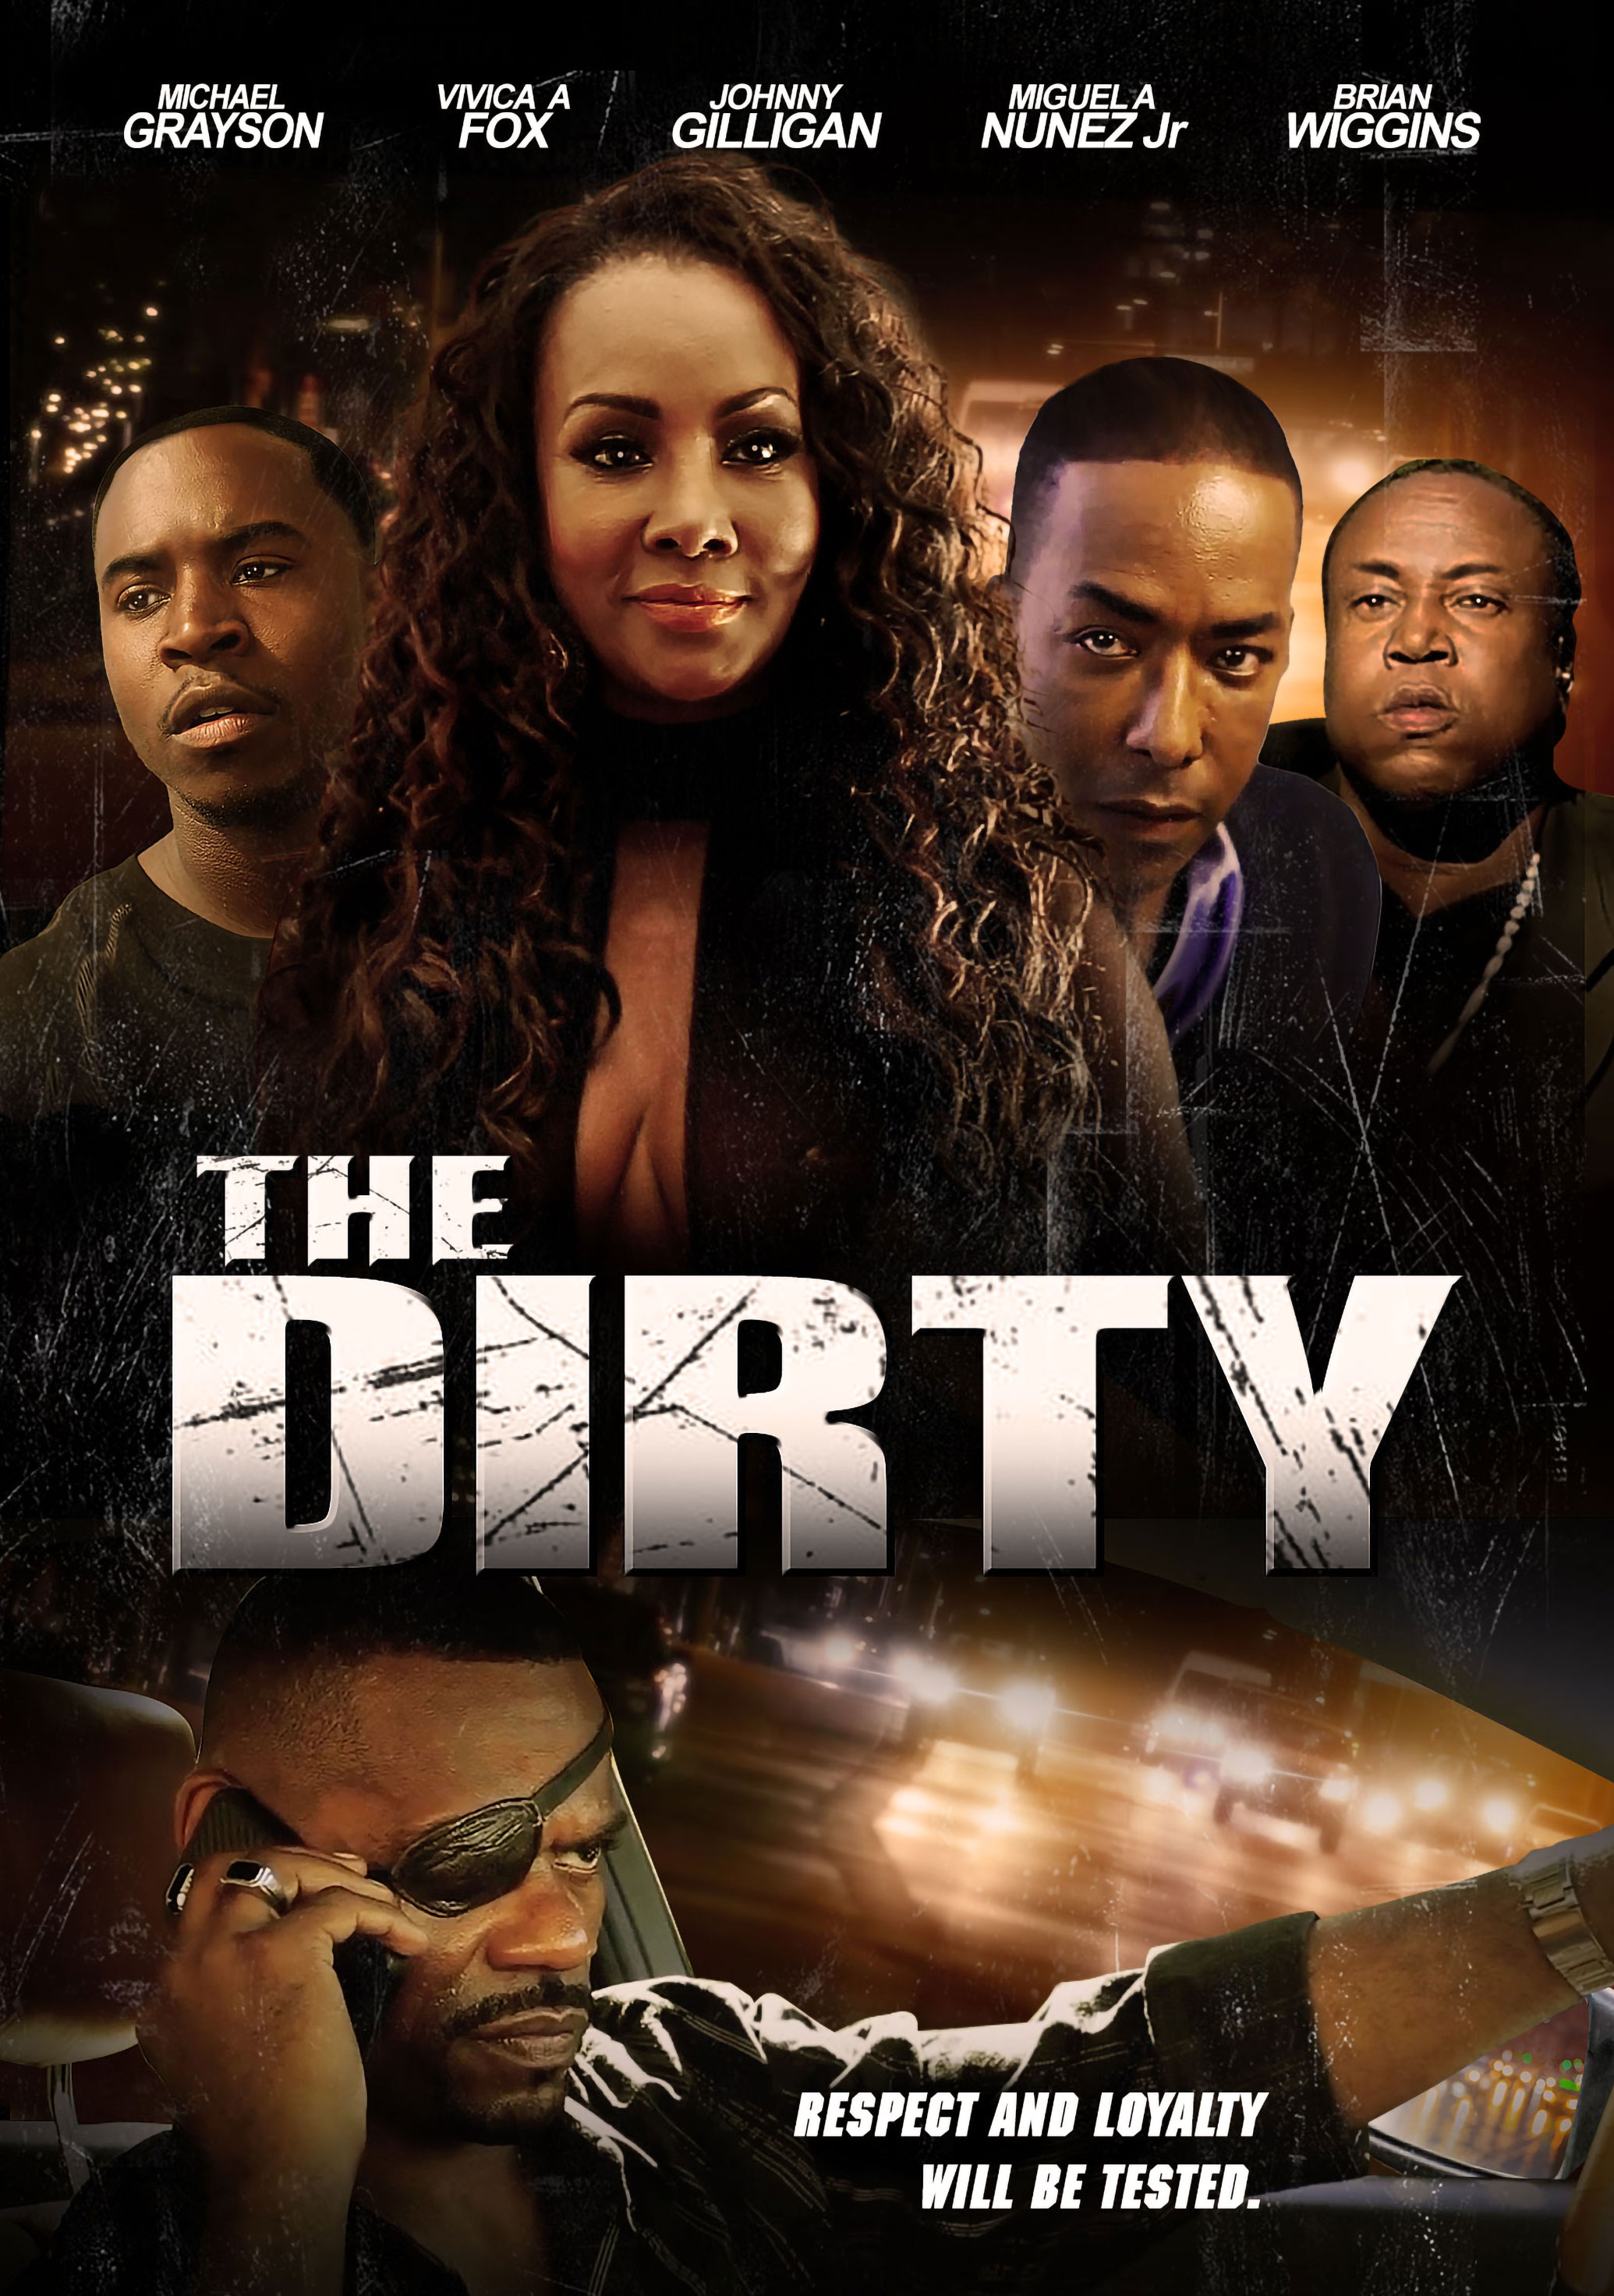 The Dirty (2013) Crime, Directed By M